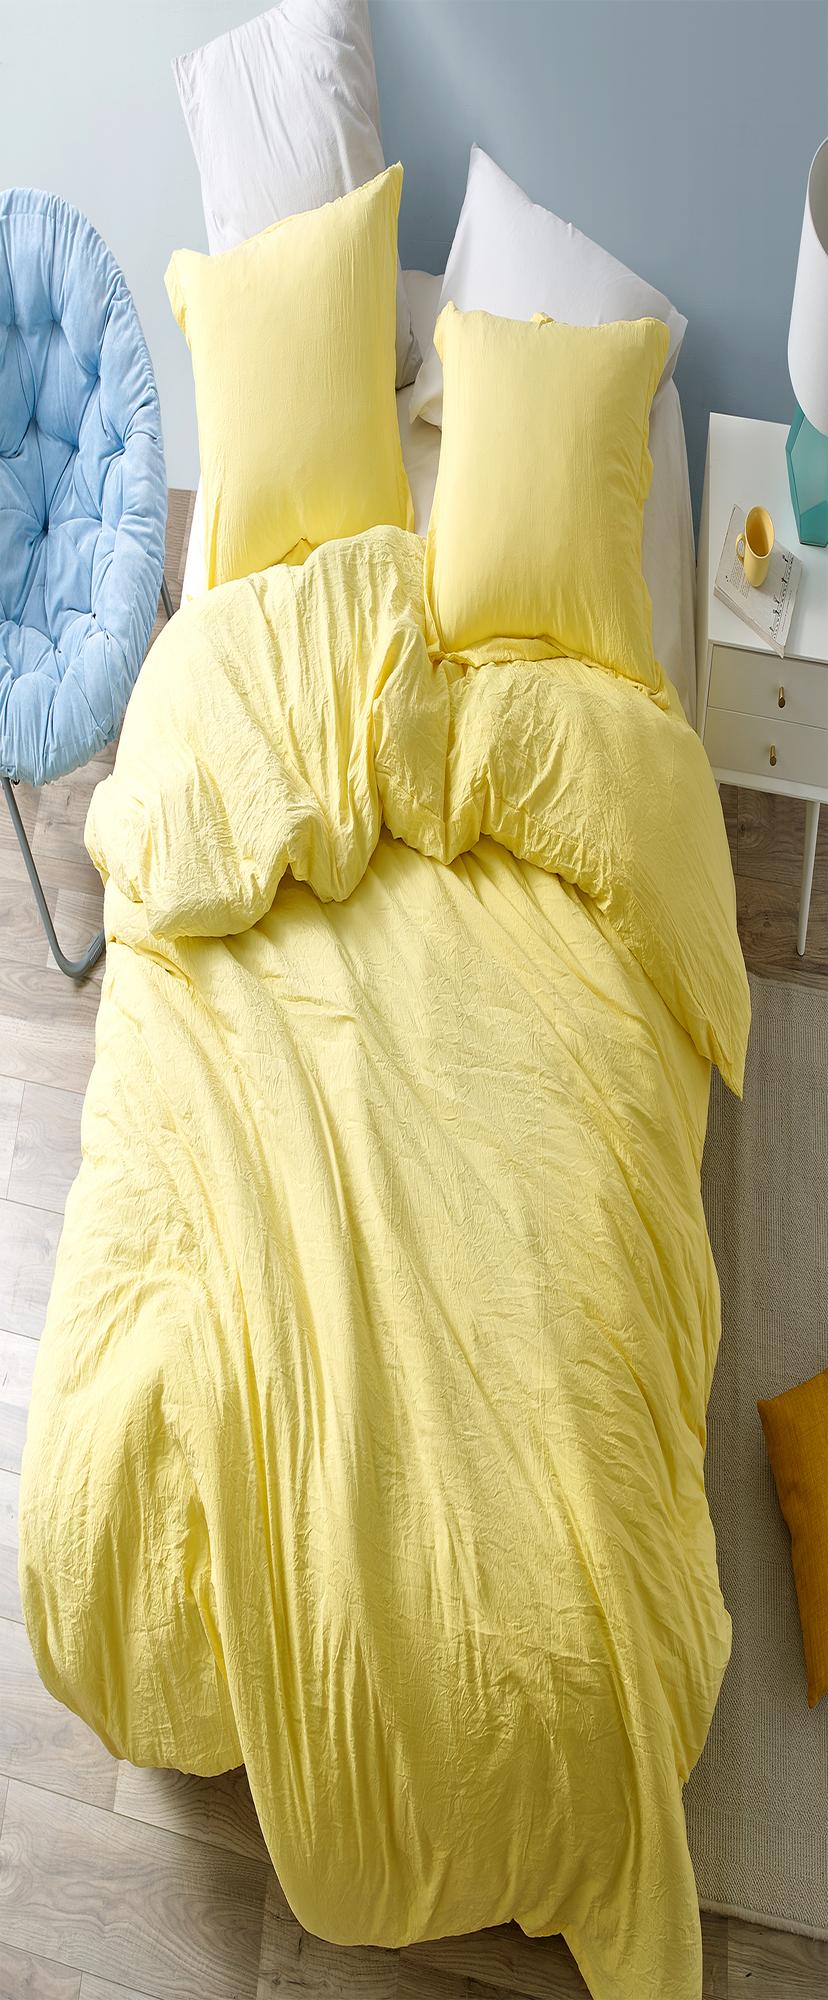 Chommie - Weighted Natural Loft® King Comforter - Limelight Yellow